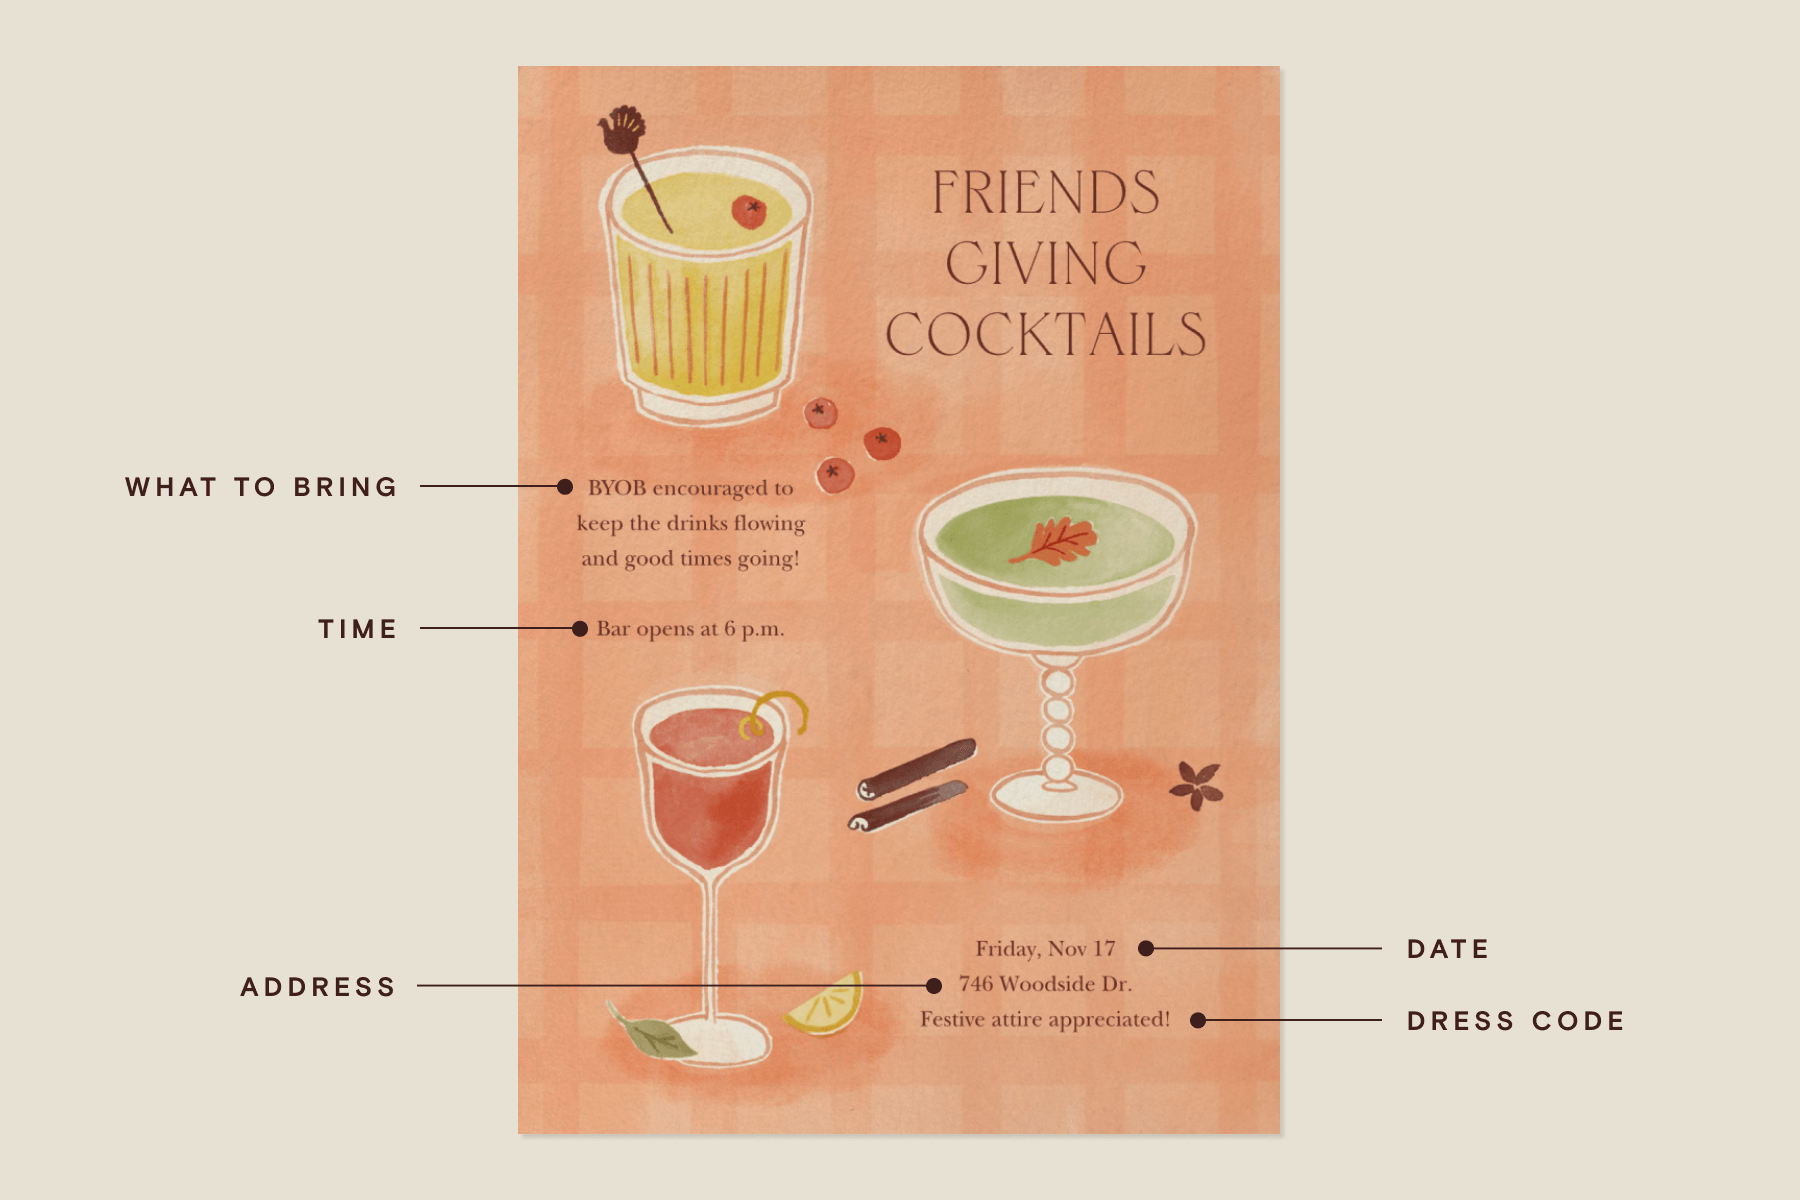 A salmon-colored Friendsgiving invitation with three colorful cocktails in different glassware, with an infographic pointing out various elements of the invitation.